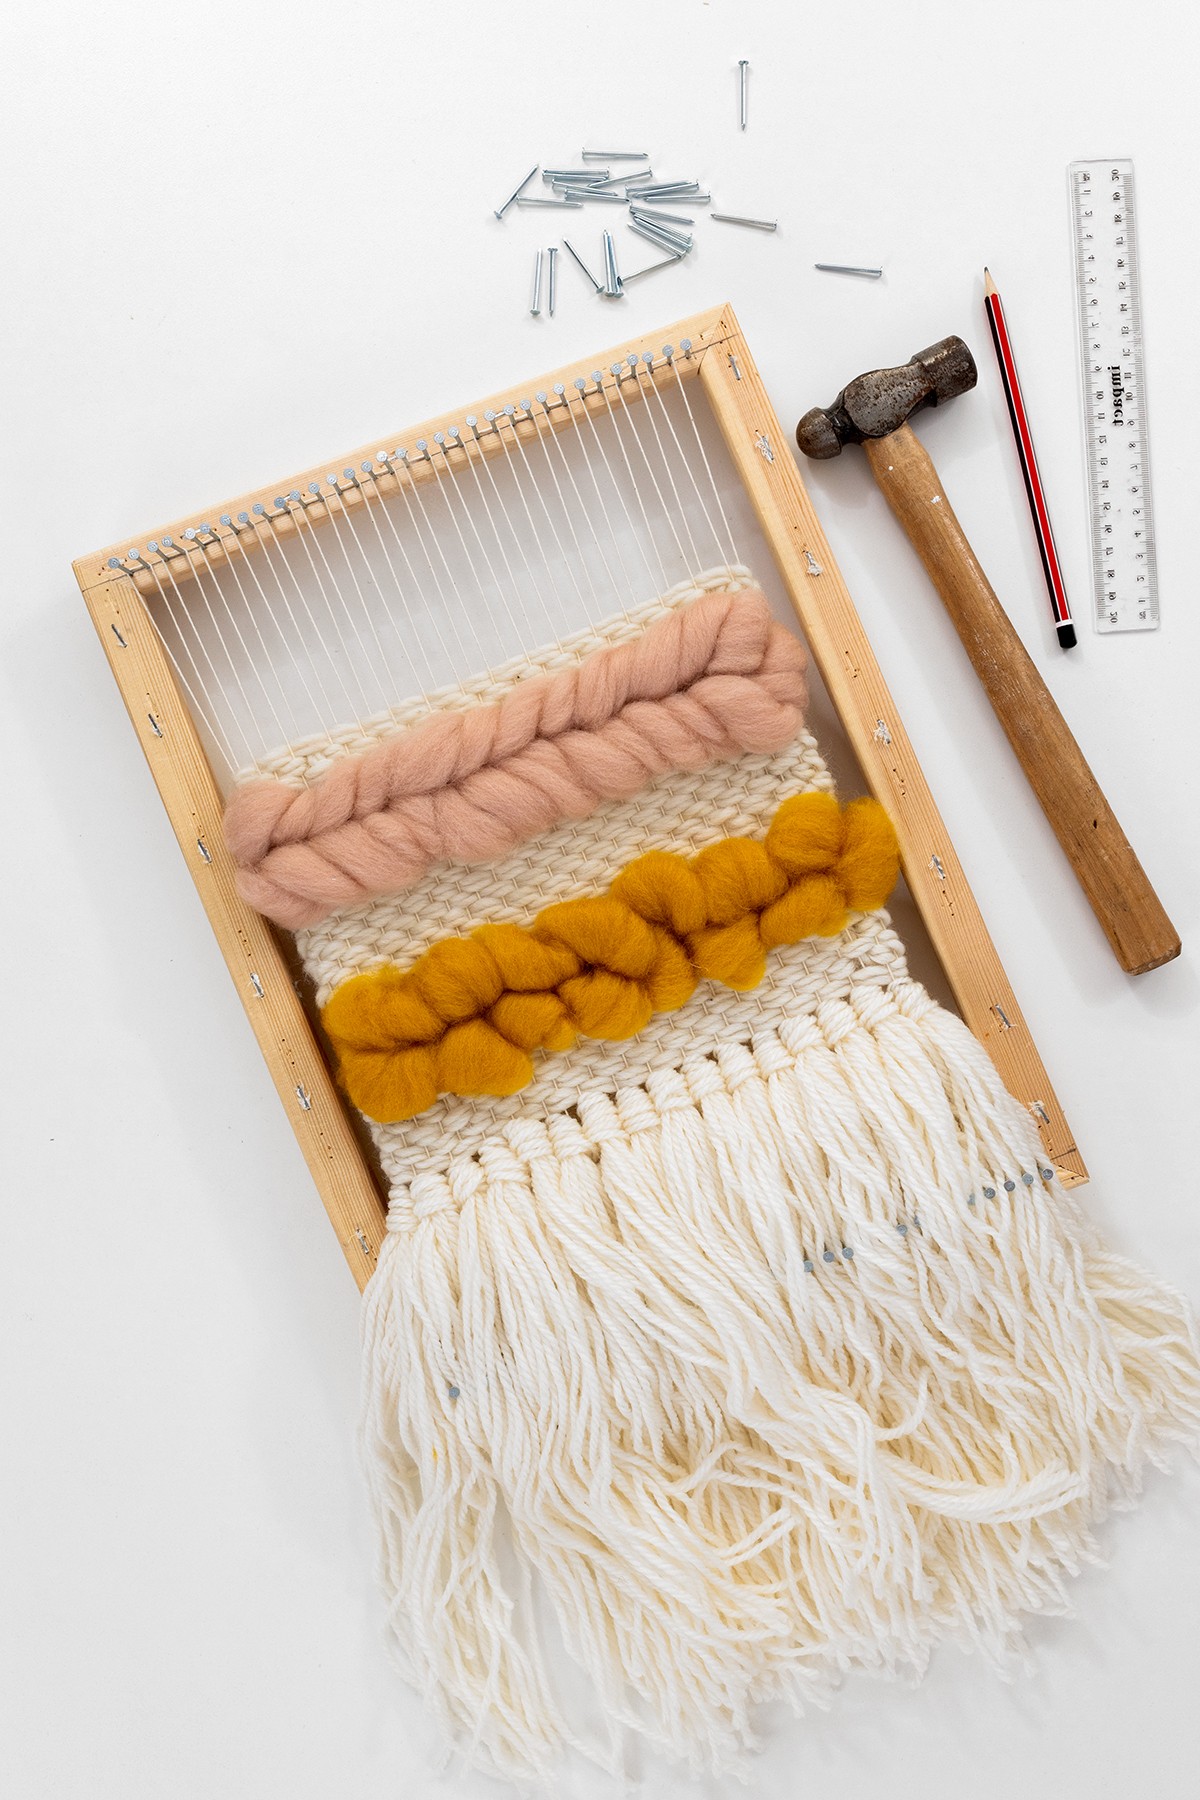 This image shows a DIY frame loom with all the supplies around it.